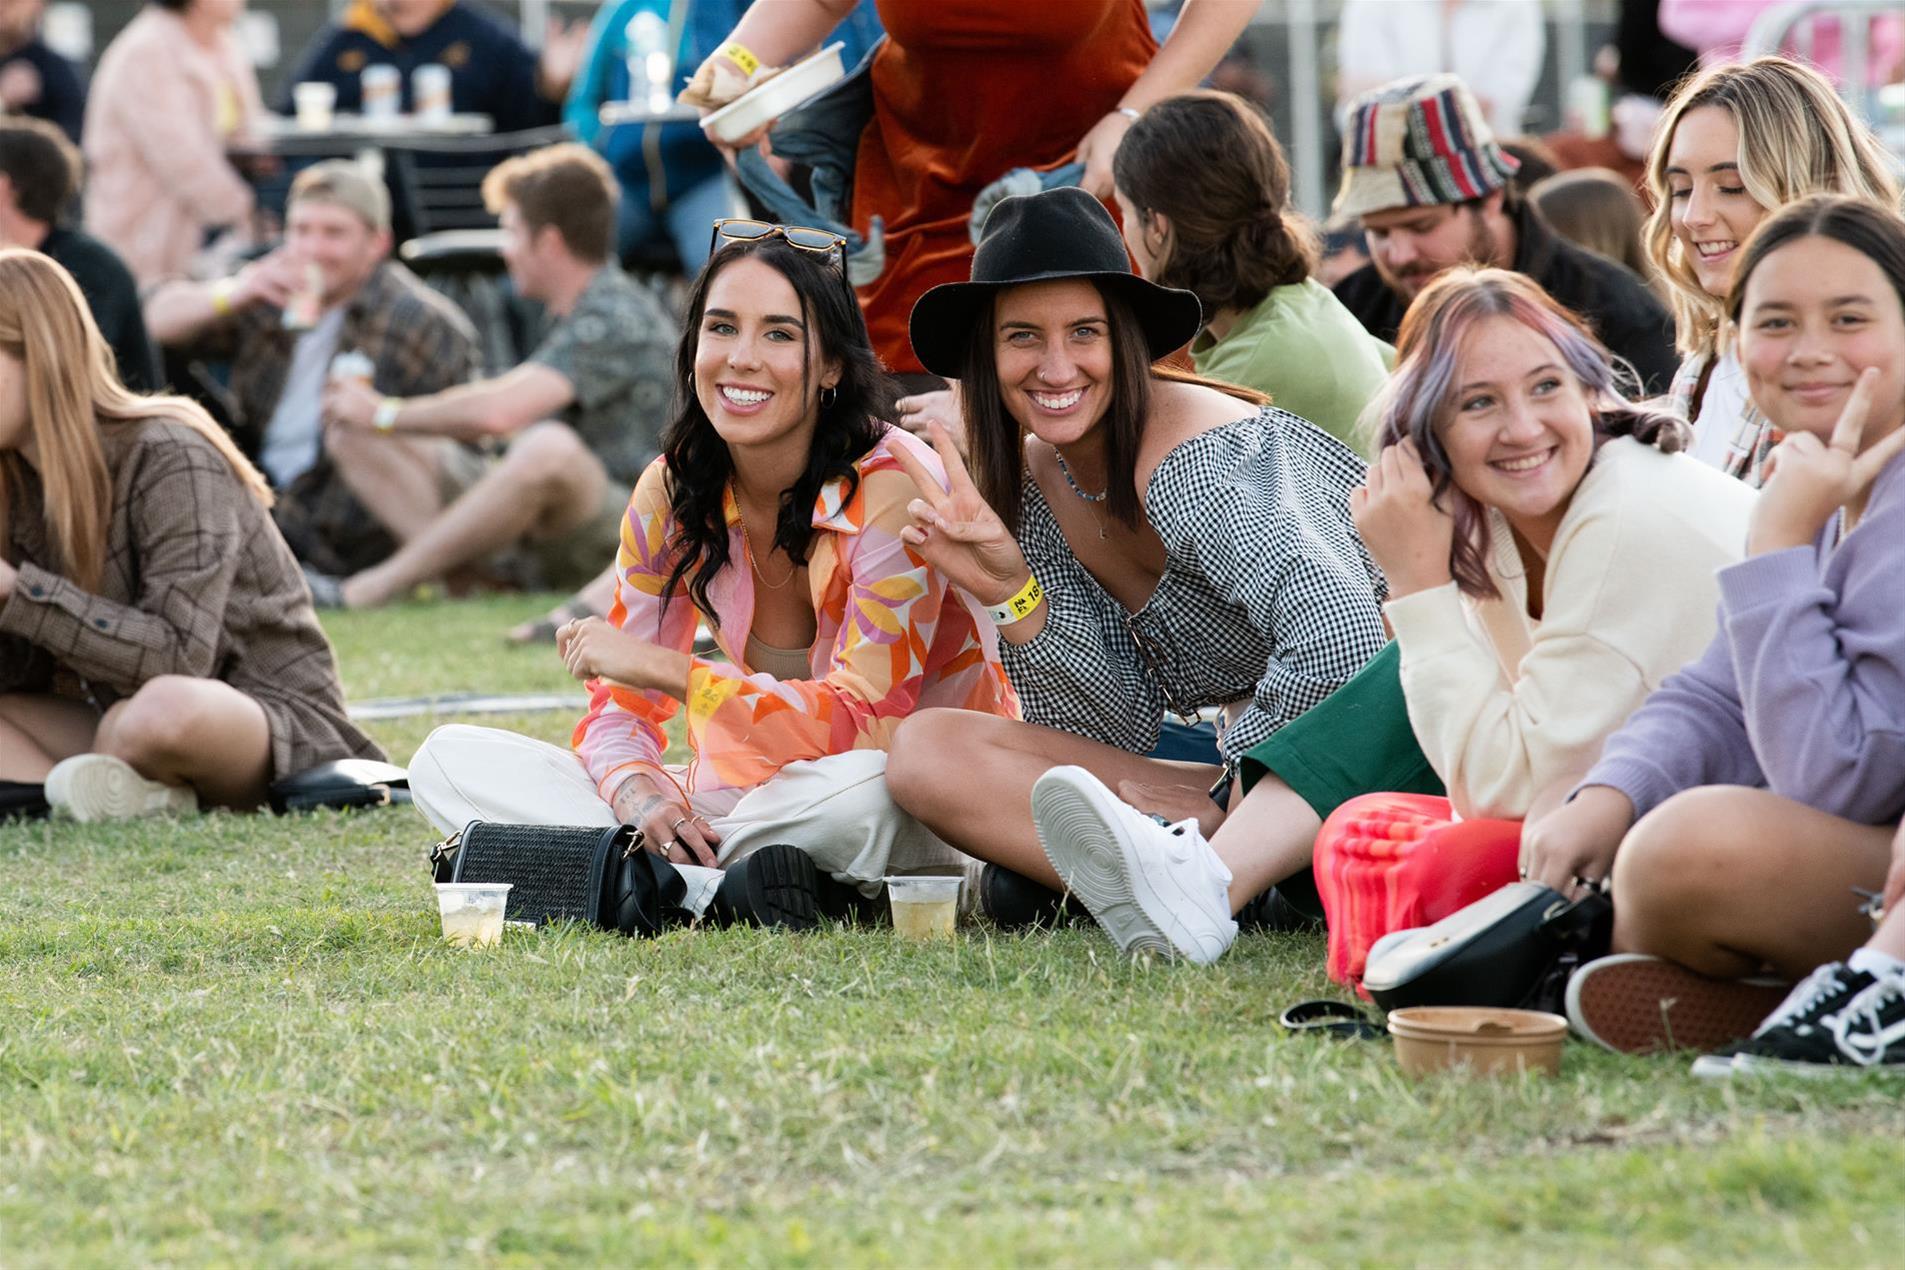 A group of females sitting on the grass at a music festival.